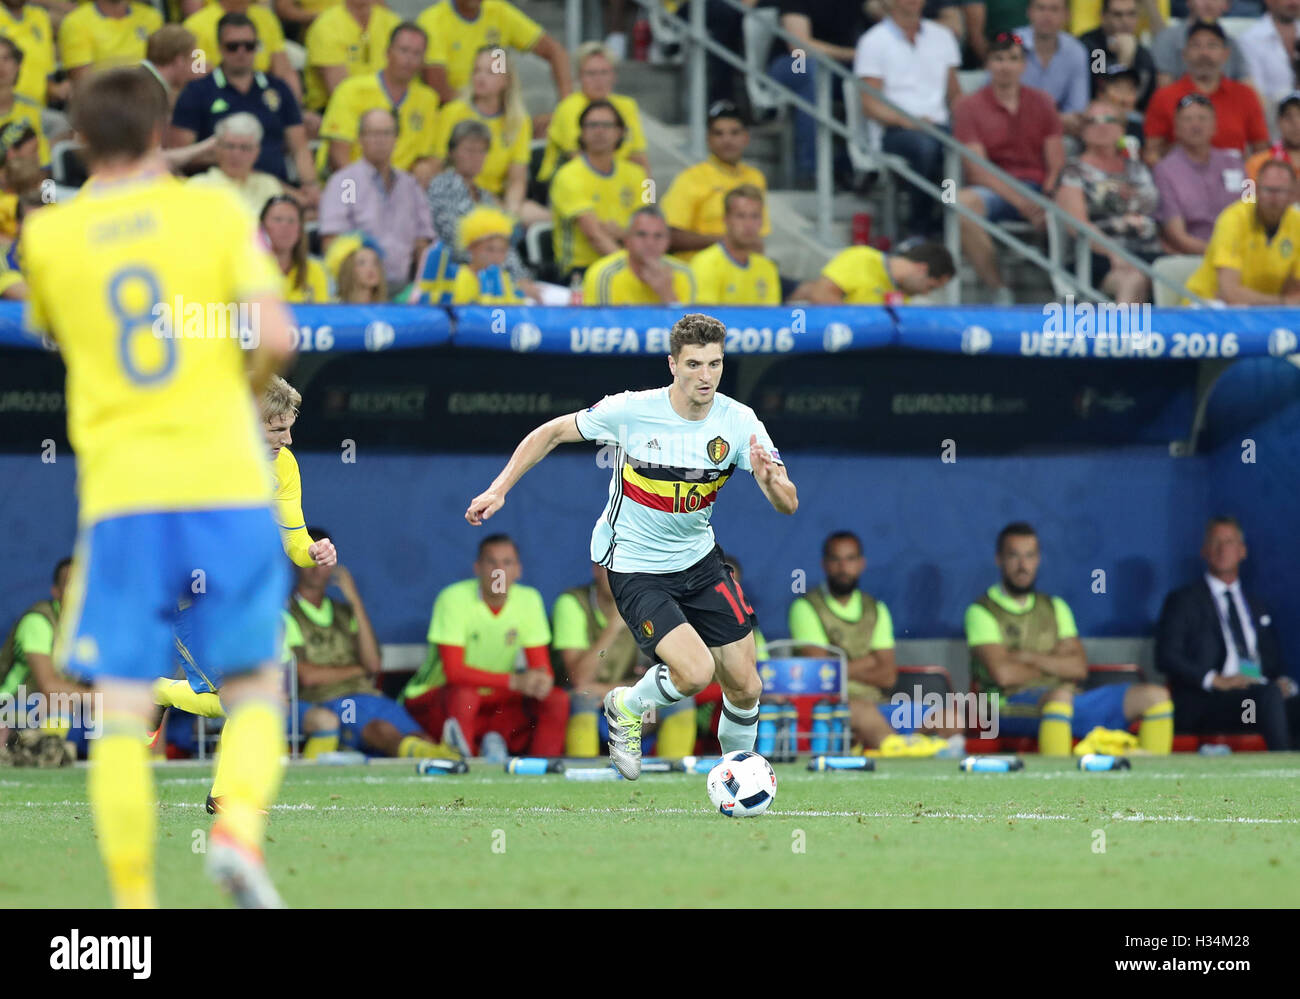 NICE, FRANCE - JUNE 22, 2016: Thomas Meunier of Belgium controls a ball during UEFA EURO 2016 game against Sweden at Allianz Riviera Stade de Nice, City of Nice, France Stock Photo